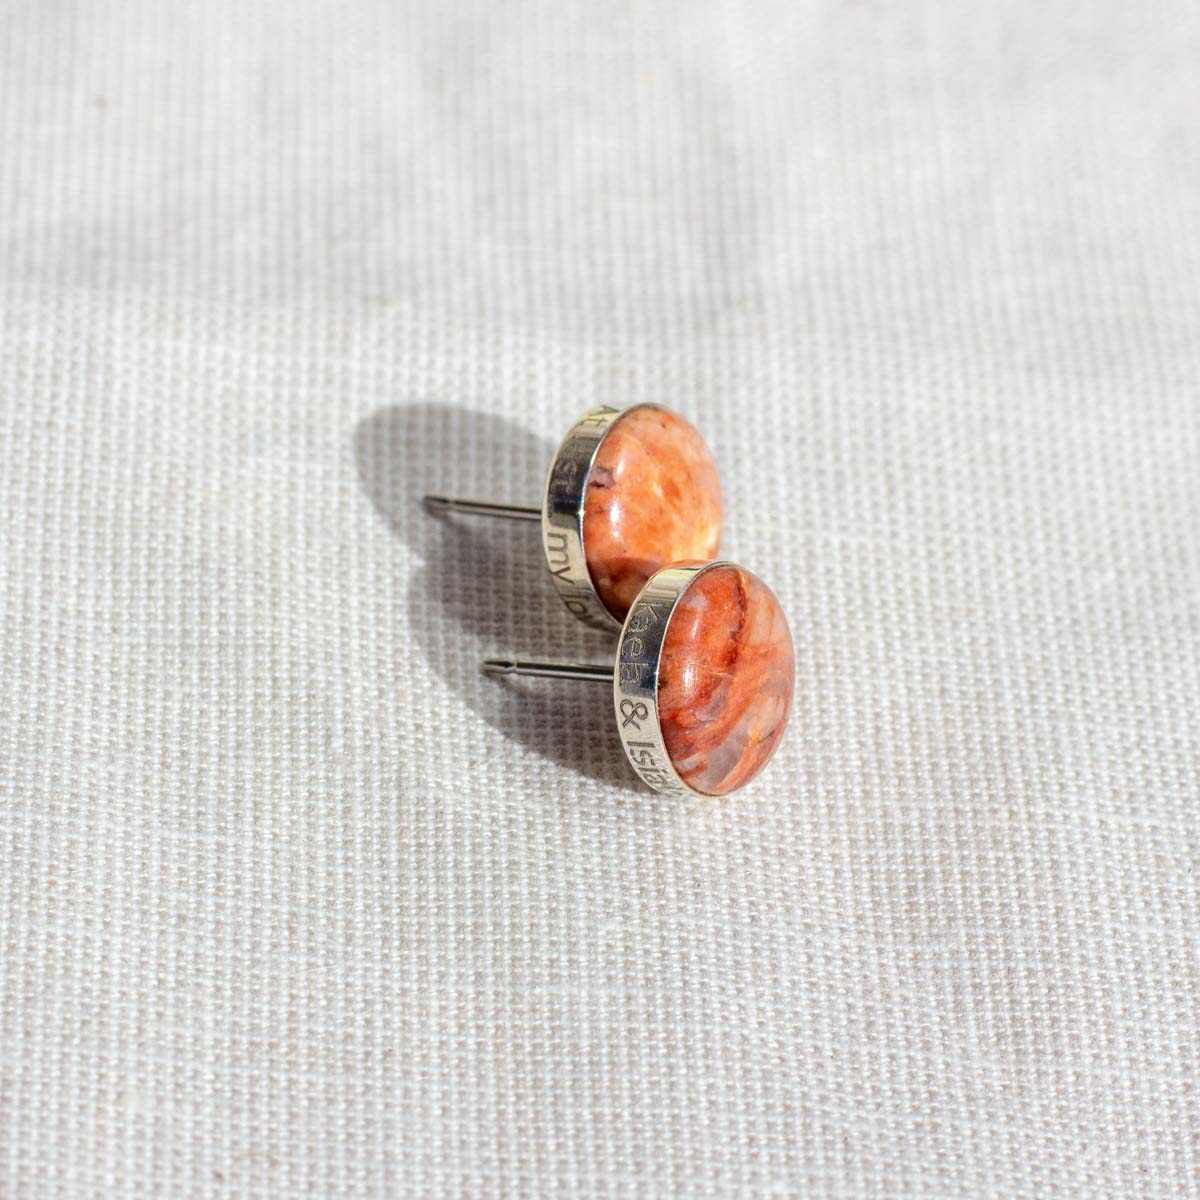 Natural pink granite stone stud earrings with engraving on the edge